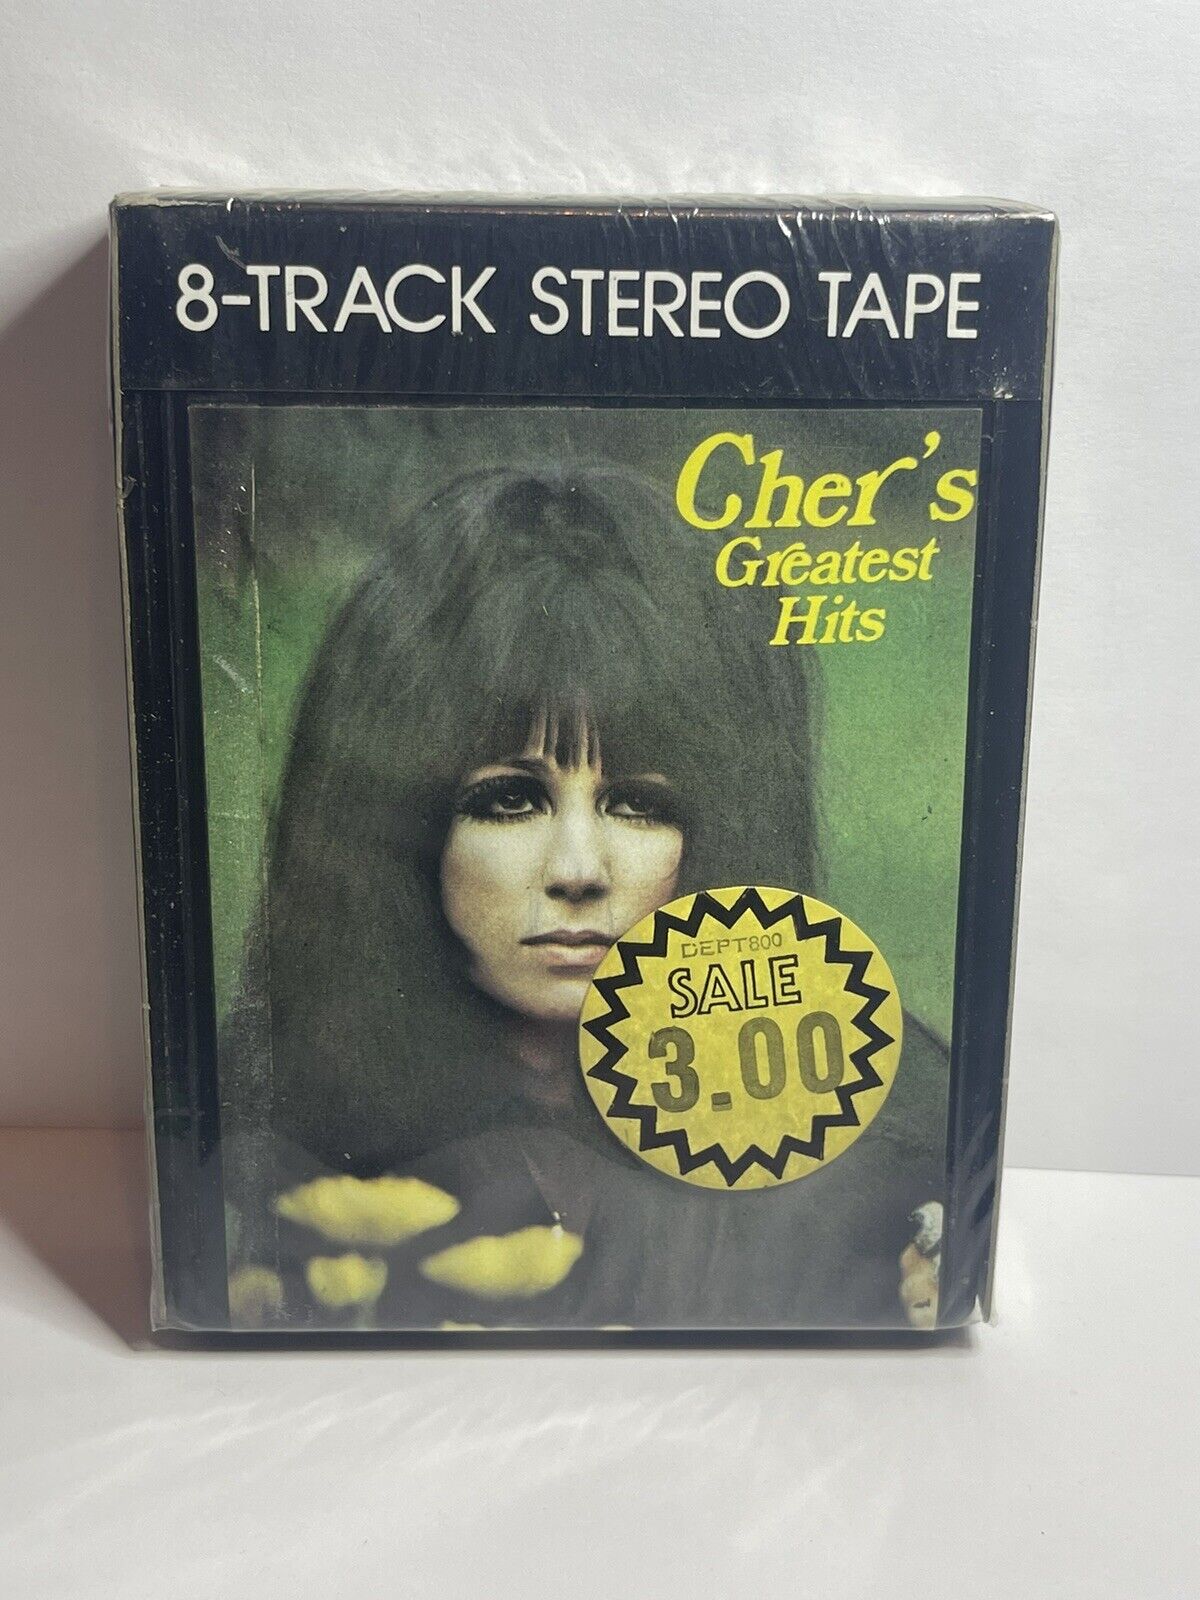 CHER GREATEST HITS ~ ULTRA RARE VINTAGE 8-TRACK TAPE CARTRIDGE BRAND NEW SEALED